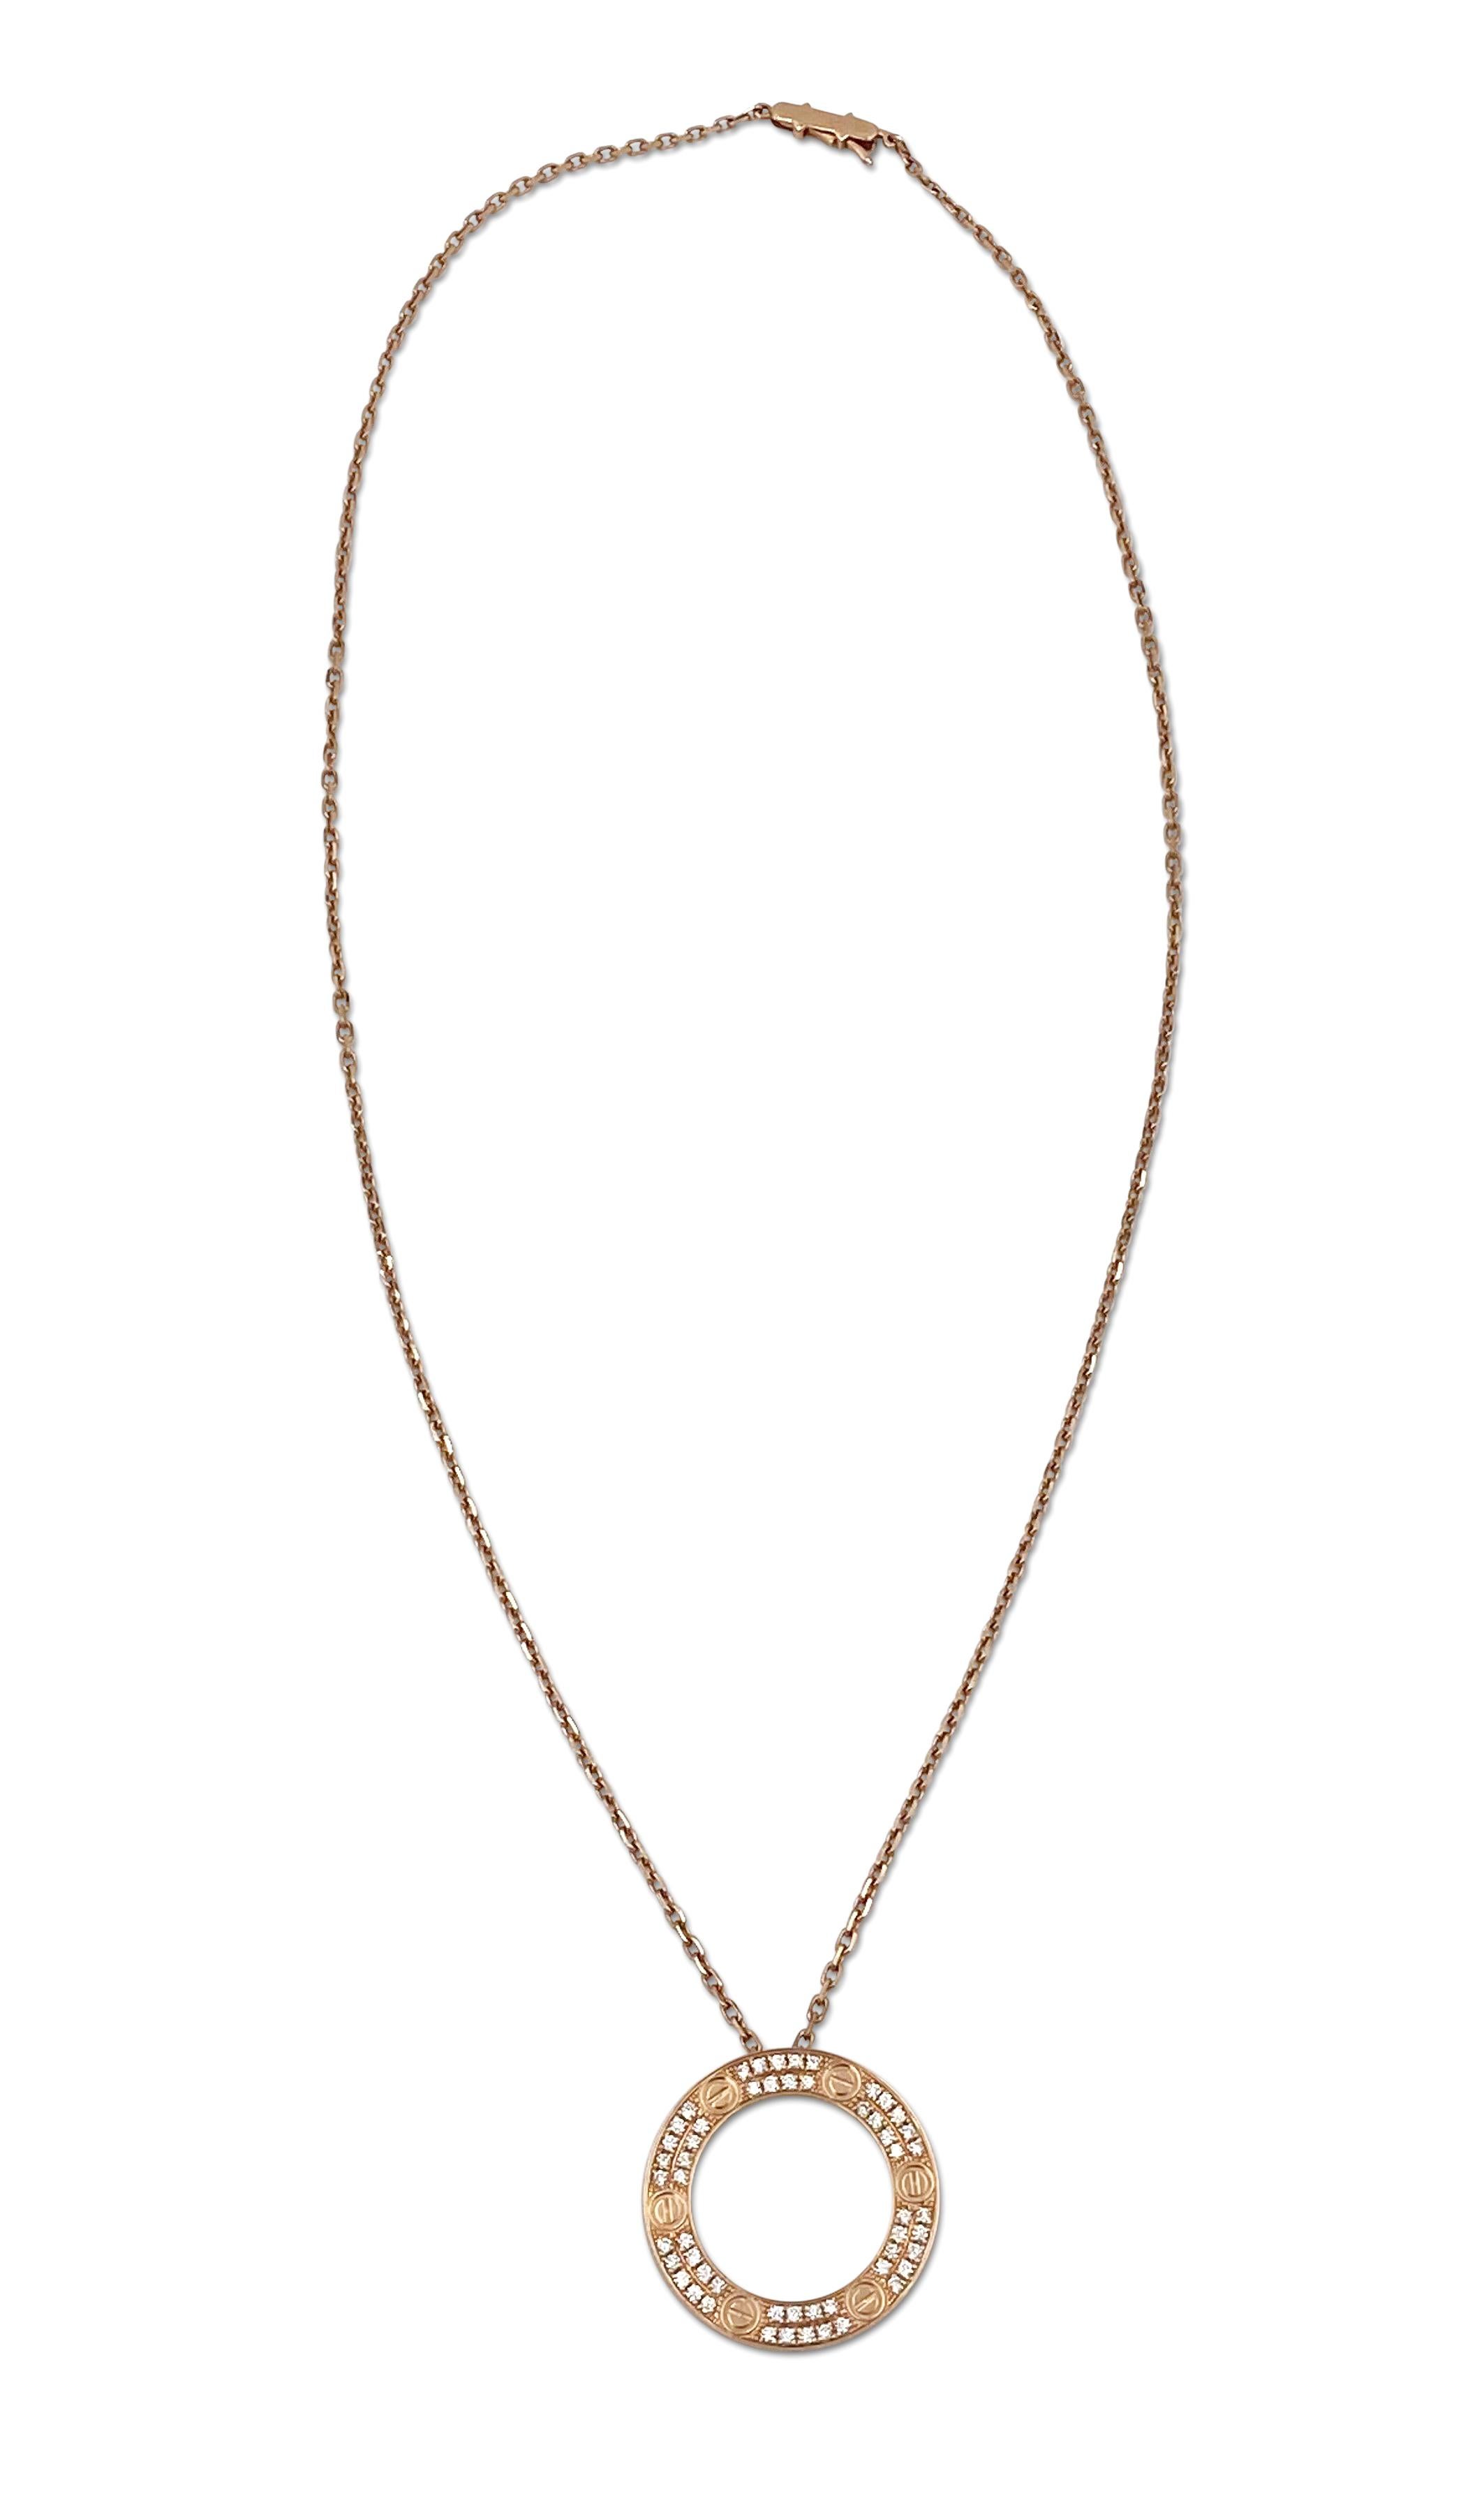 Authentic chain and ring charm necklace from the Cartier Love collection. Made in 18 karat rose gold and oval link chain with a half inch round ring and screw top motifs set with round brilliant cut diamonds (F color, VS clarity) of approximately